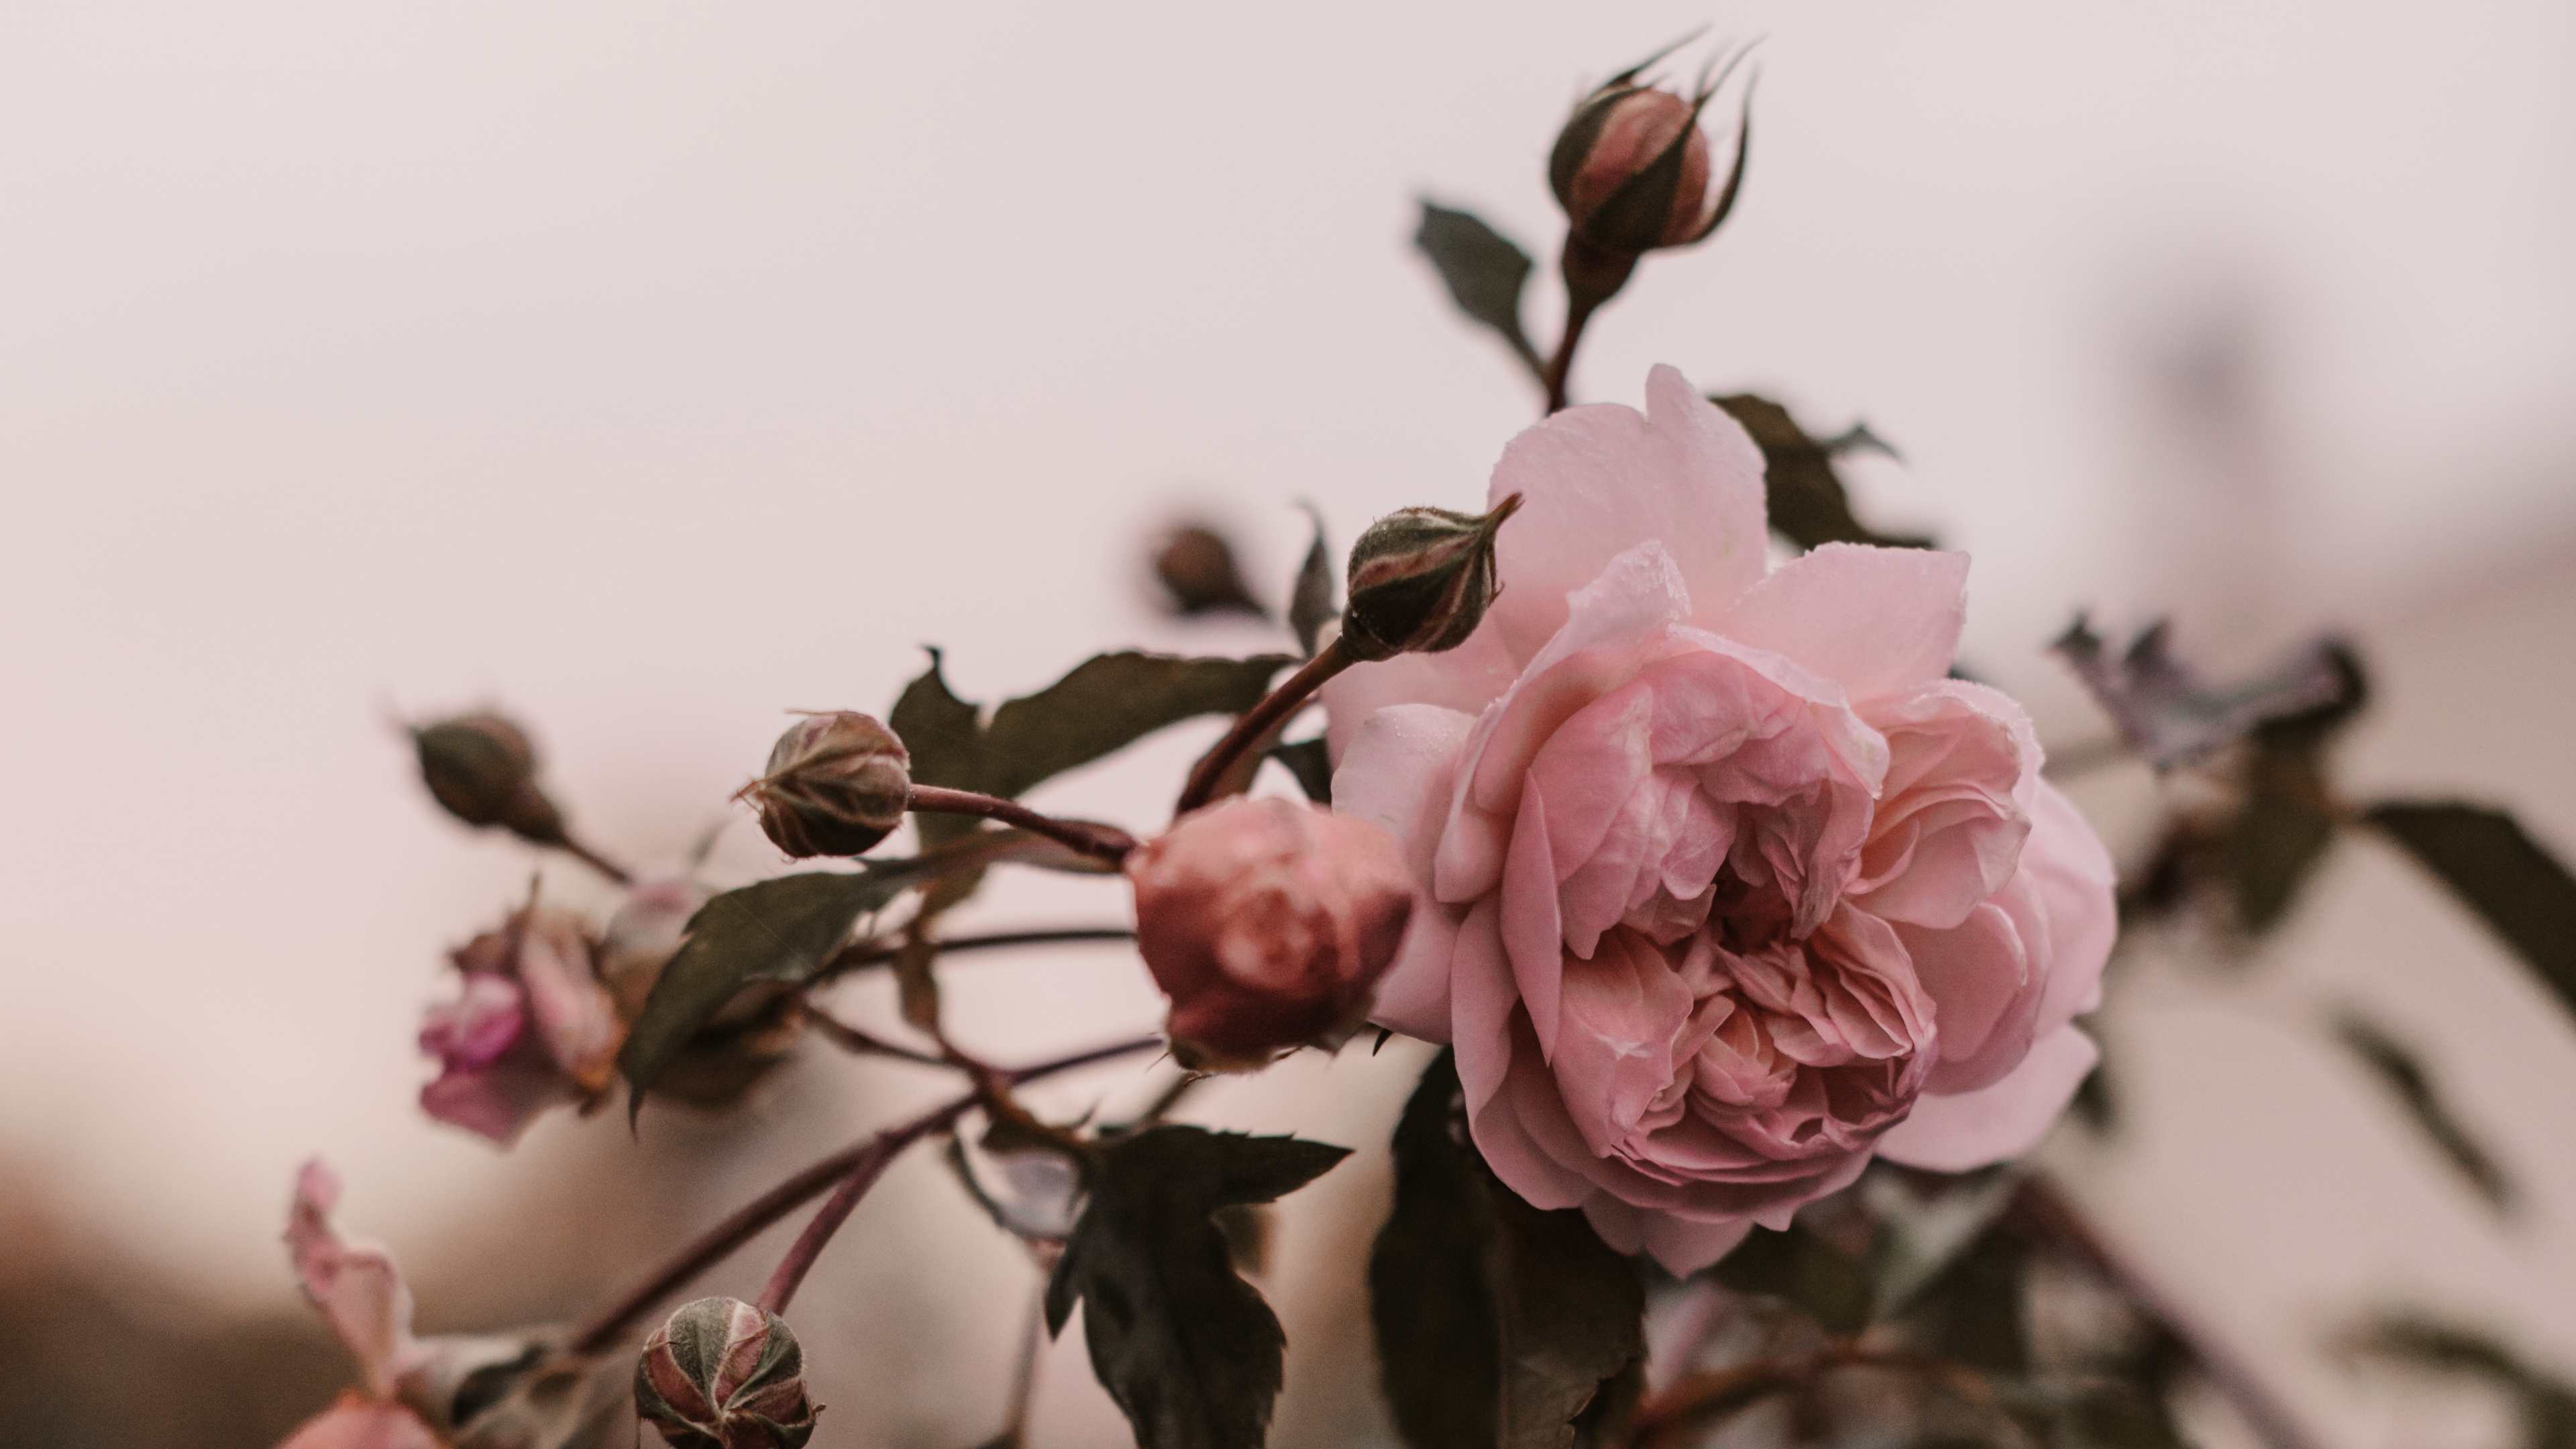 Pink Roses in Bloom During Daytime. Wallpaper in 3840x2160 Resolution